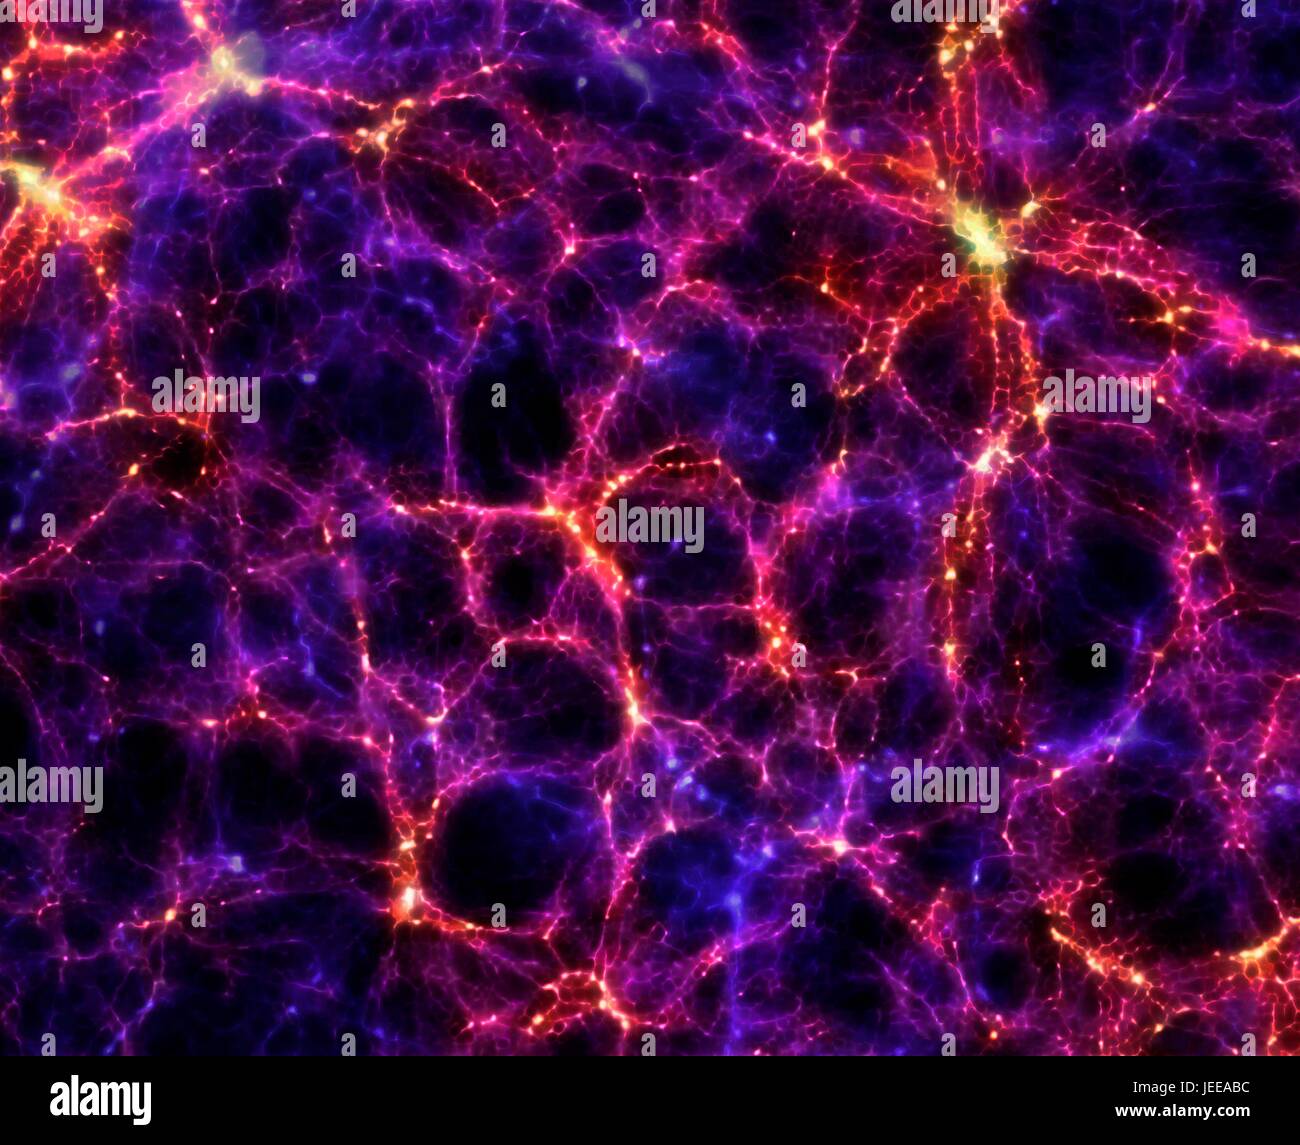 An impression of the large-scale structure of the universe, showing galaxy clusterrs and superclusters arranged in long filaments and concentrated at nodes. Stock Photo